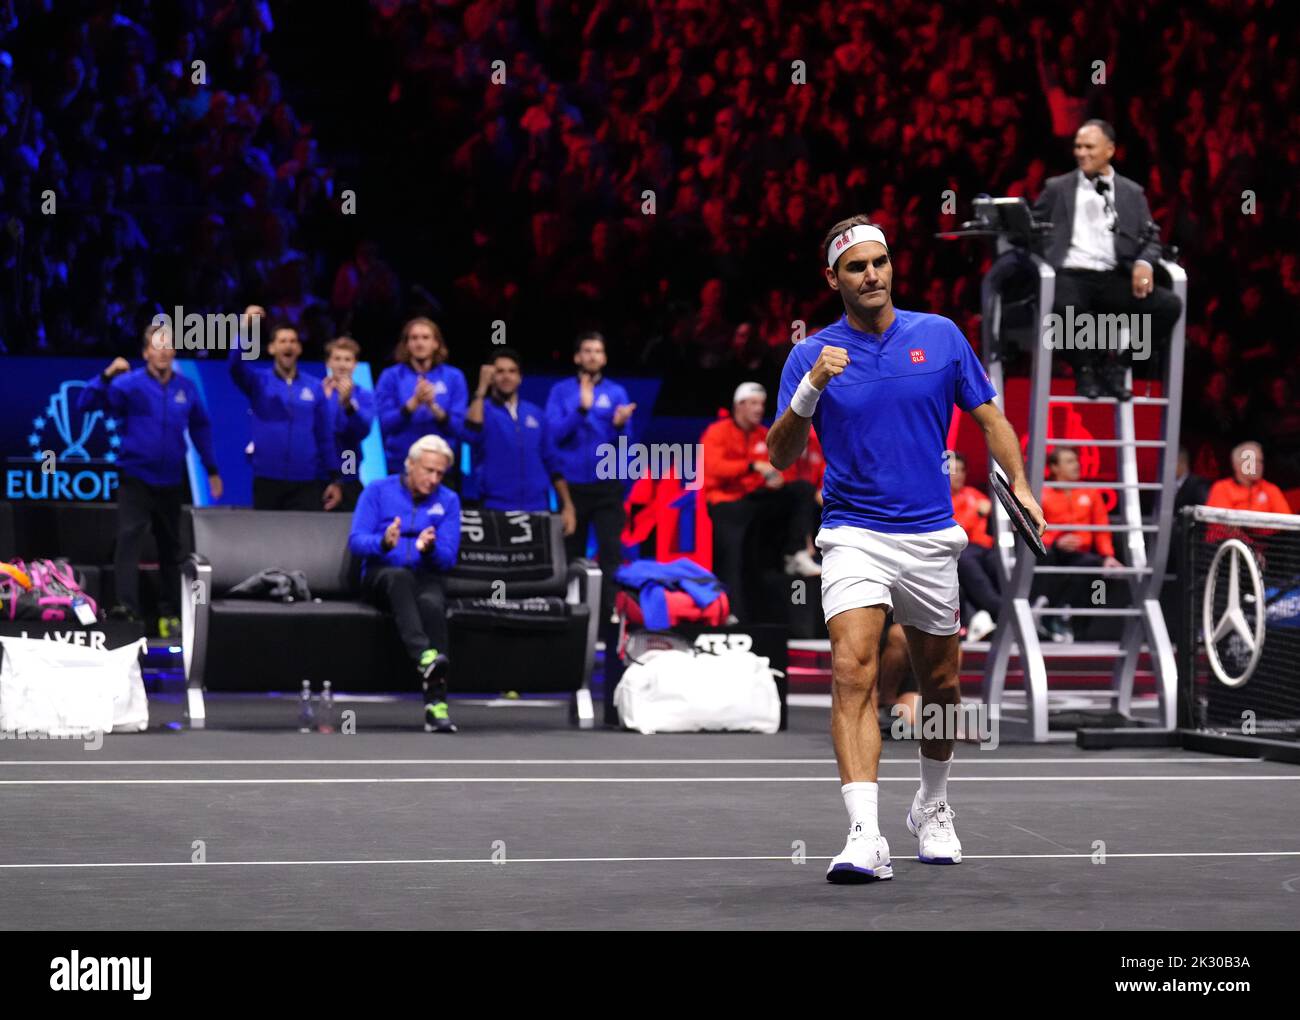 Team Europe's Roger Federer reacts during their match with Team World's Jack Sock and Frances Tiafoe on day one of the Laver Cup at the O2 Arena, London. Picture date: Friday September 23, 2022. Stock Photo